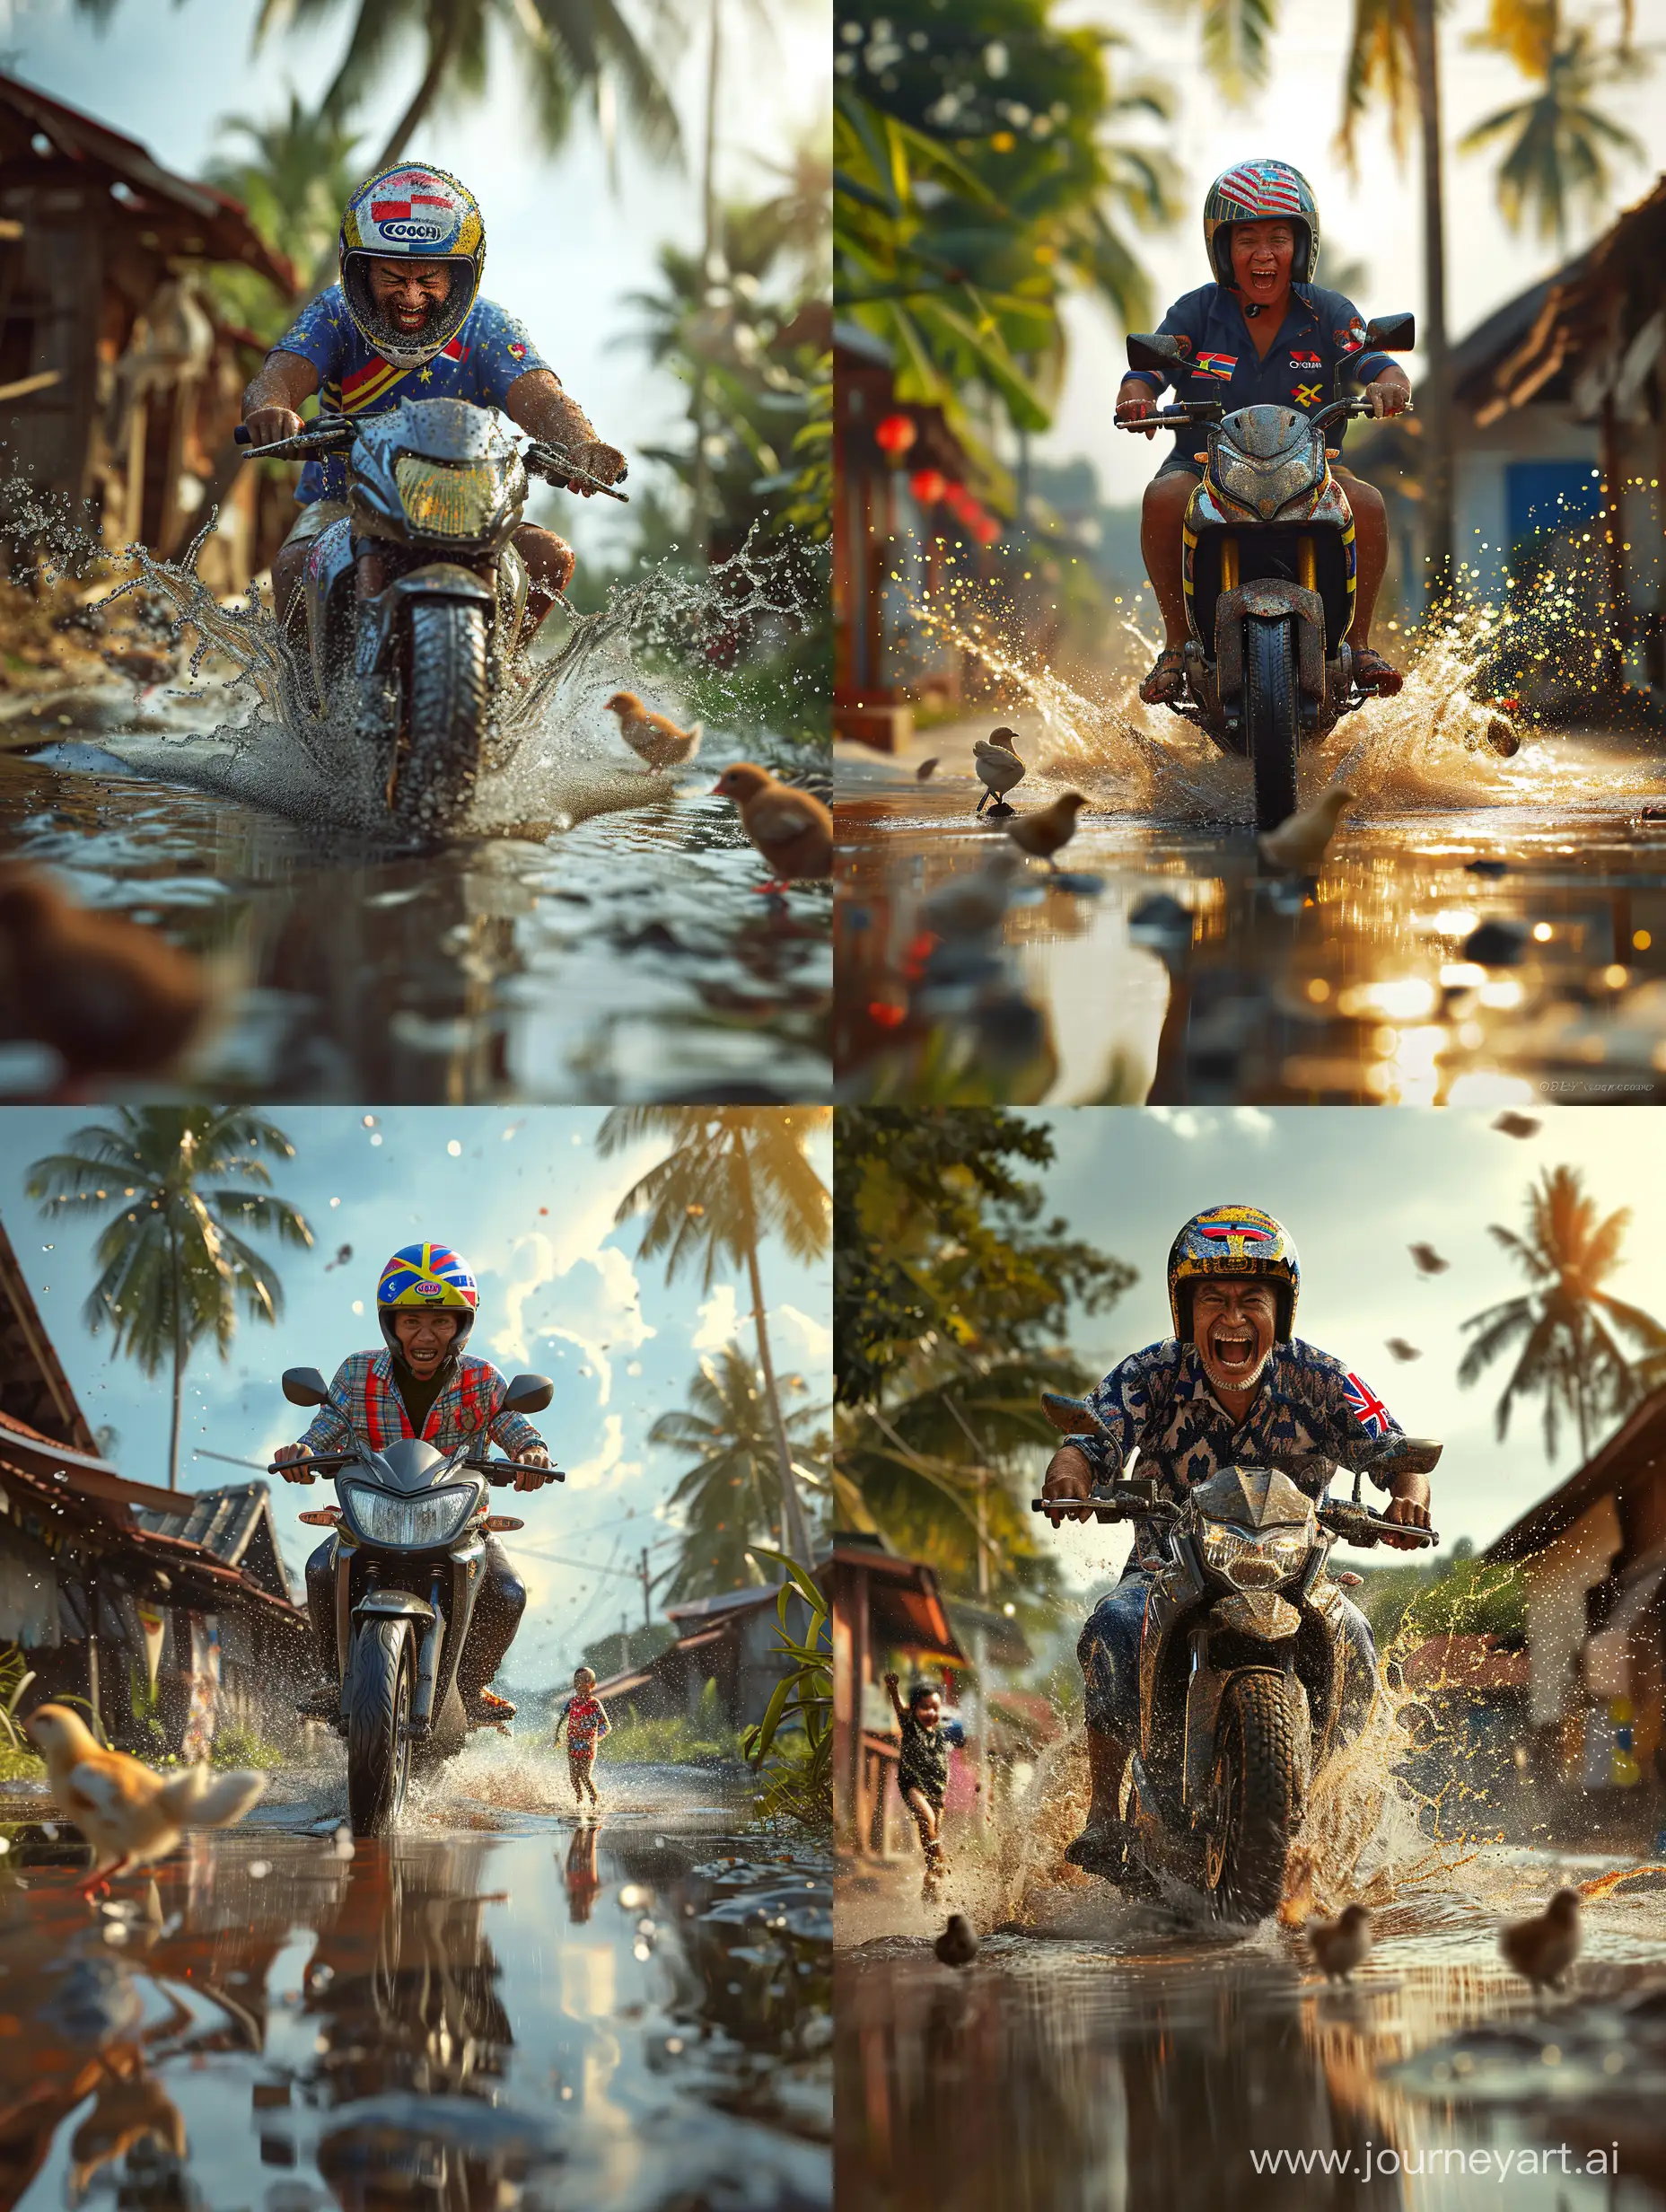 ultra realistic, Malay uncle rides a superbike wearing a helmet. on the helmet there is a malaysian flag pattern. POakcik screamed with pleasure. through puddles and splashes of water. there are chicks running. background of Malay village and coconut trees. refraction of morning sunlight. canon eos-id x mark iii dslr --v 6.0